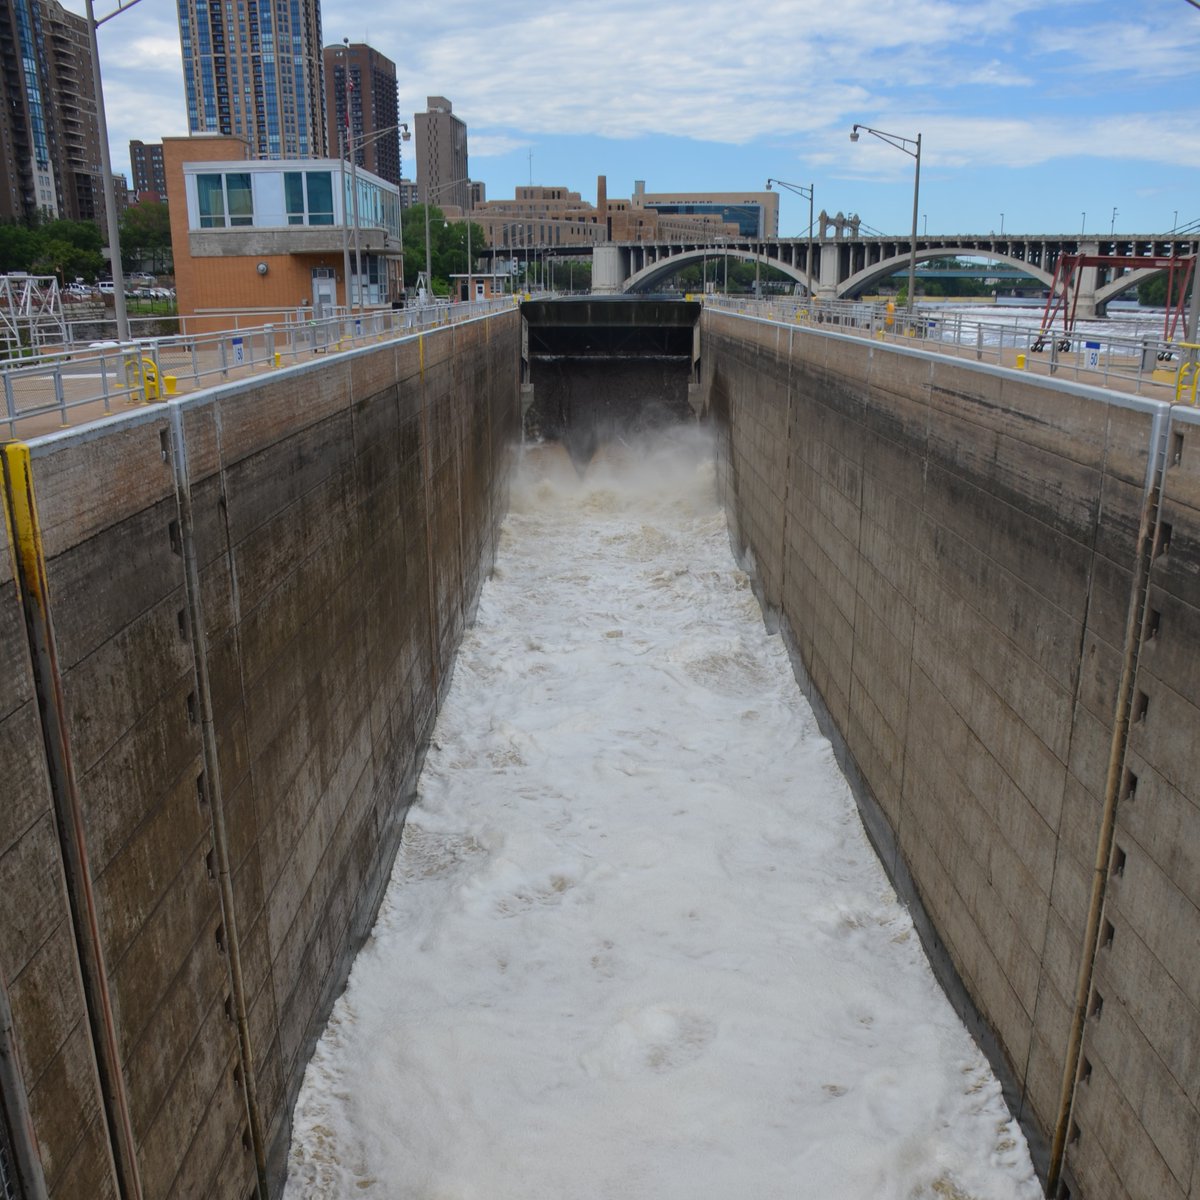 Our staff will perform an exercise on the Upper St. Anthony Falls Lock and Dam Tainter gate, Thursday morning. The purpose is to maintain the mechanical components and clear any debris that may have collected in front of the gate and under the water. #BuildingStrong #USACEMVD